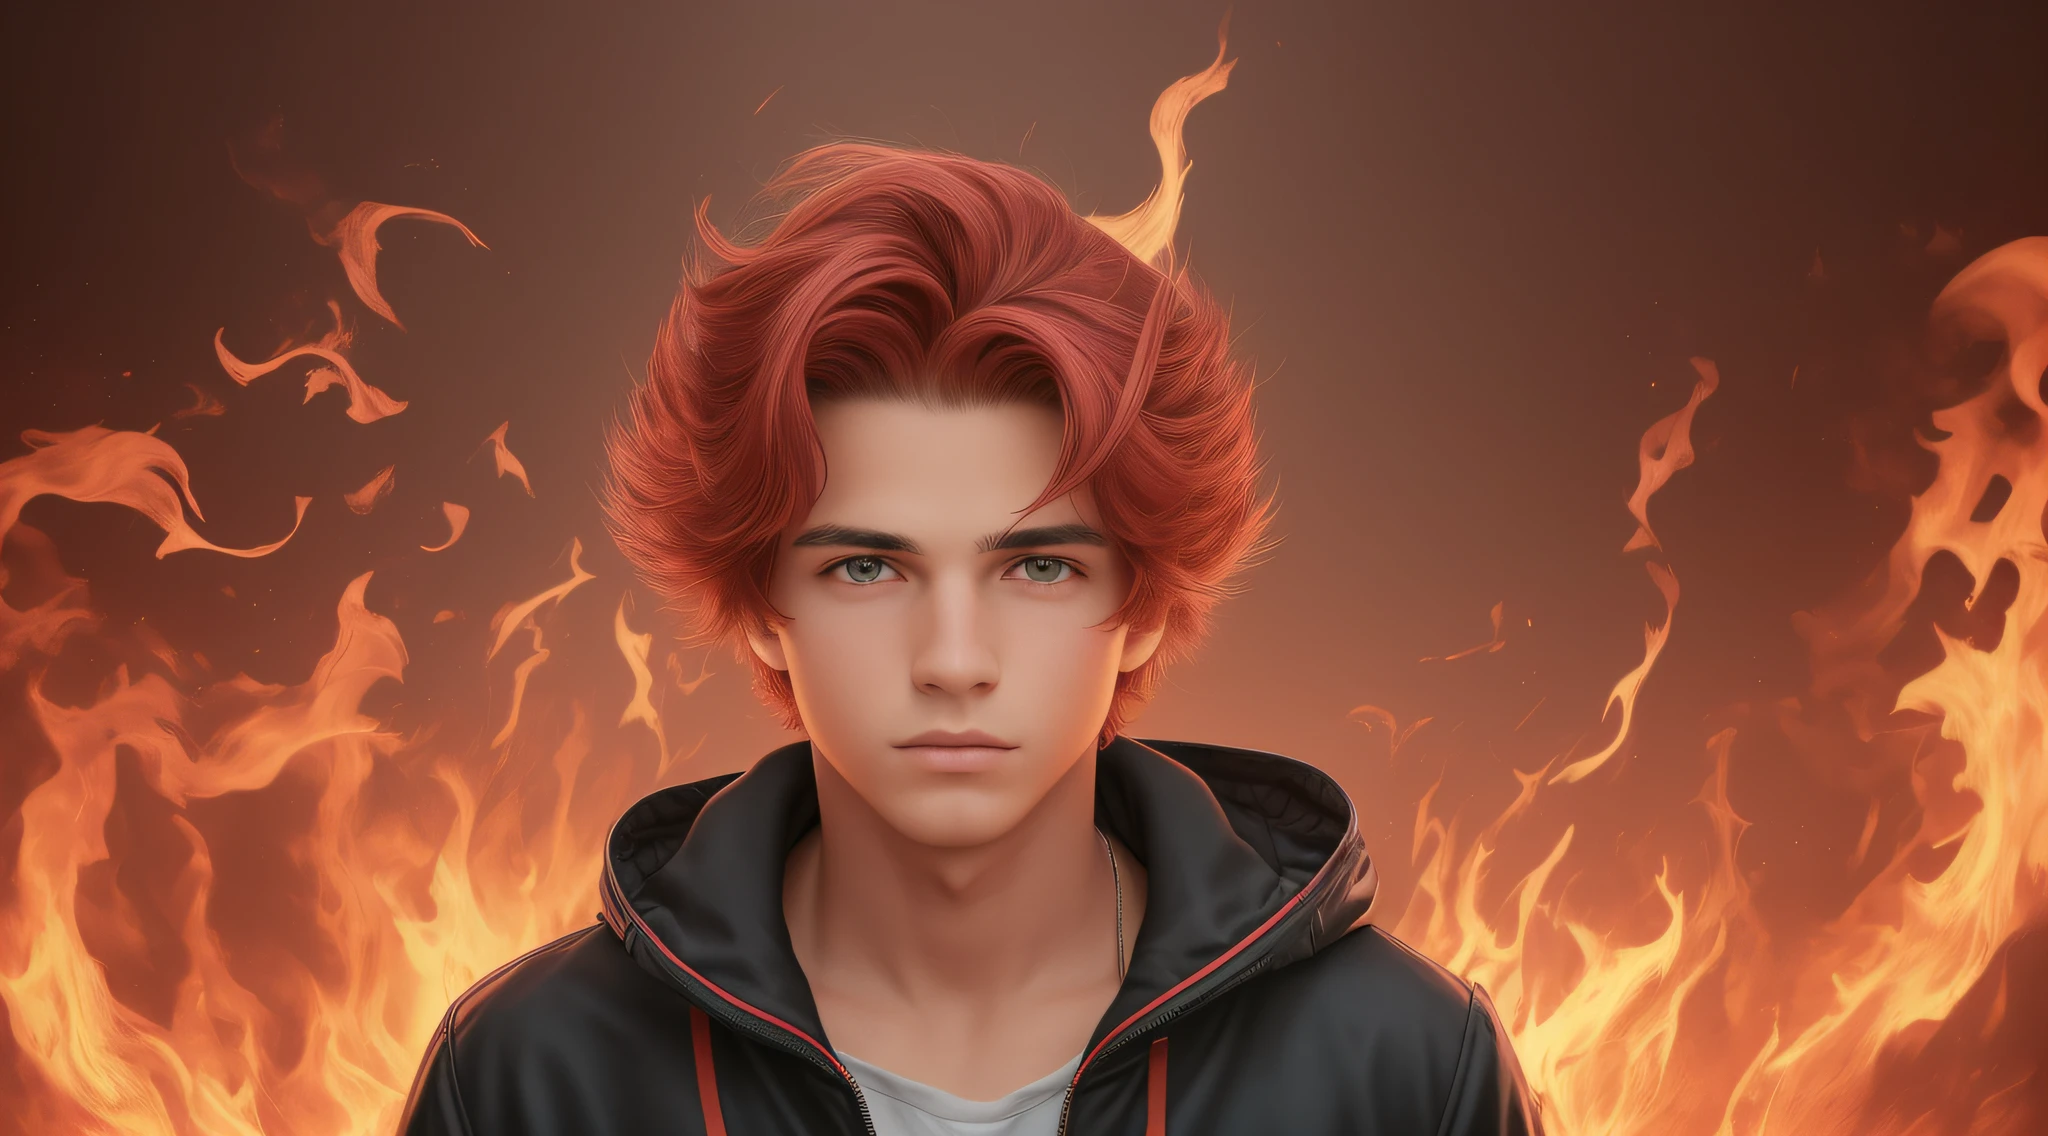 best qualityer, work-before, ultra high nothing, photorrealistic, raw-photo, Boy  20 years old, russian blonde long straight hair, with red leather jacket outfit, Estilo Retrato, flames are glowing red flames. --auto --s2